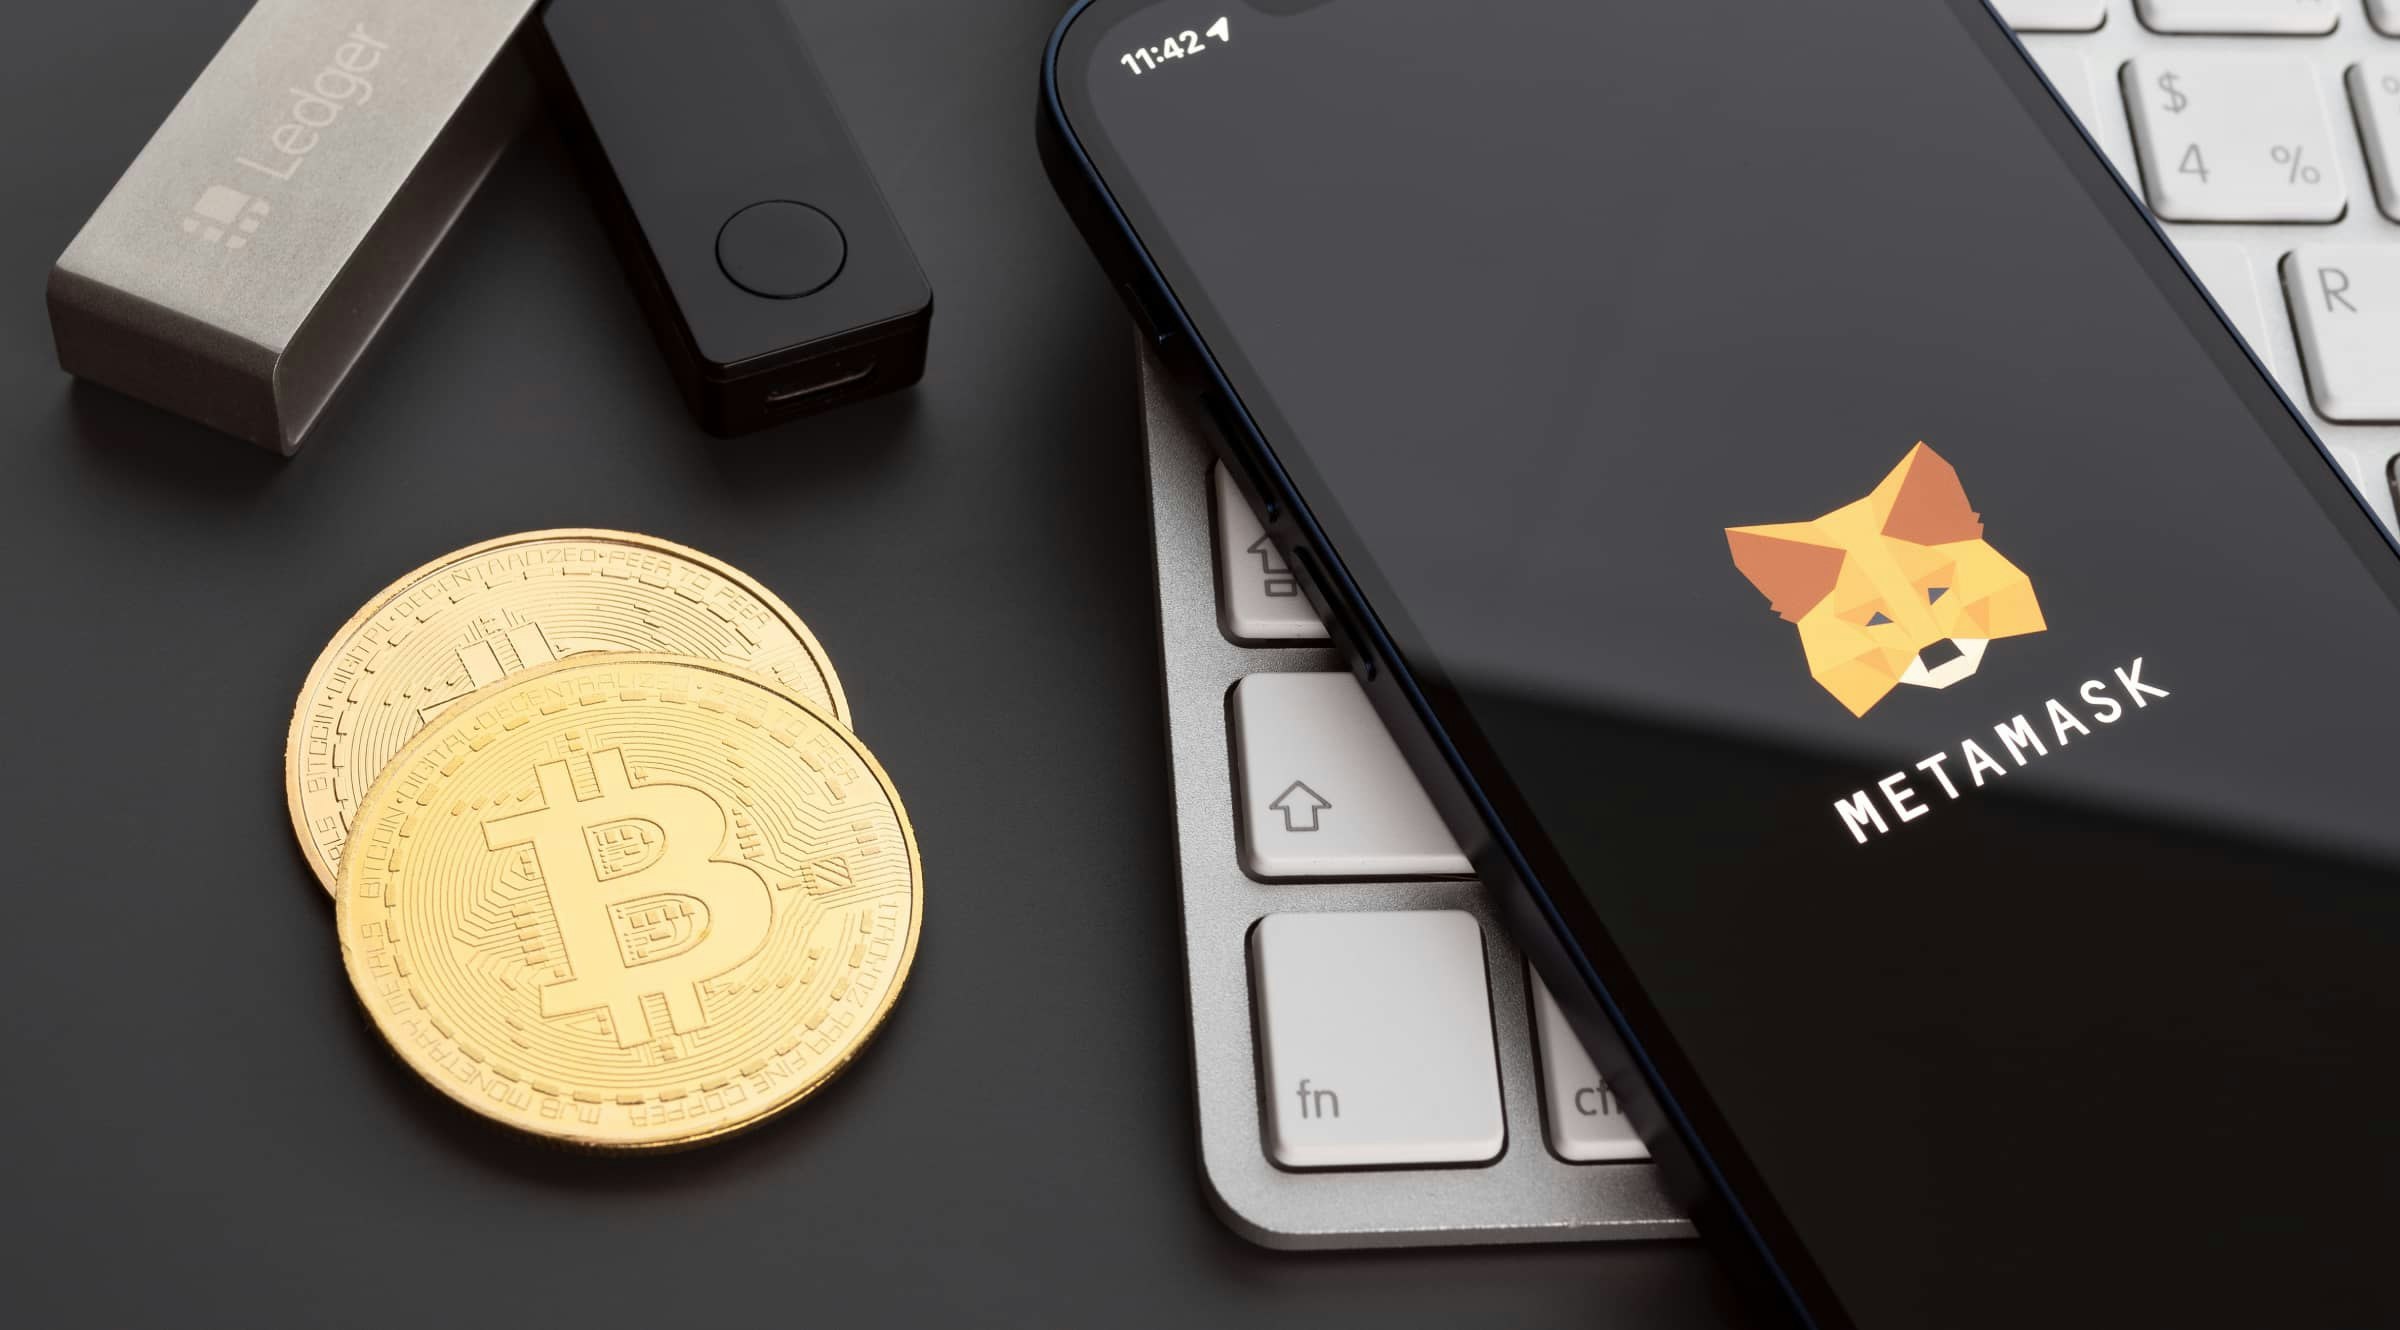 How to buy crypto on MetaMask using Apple Pay